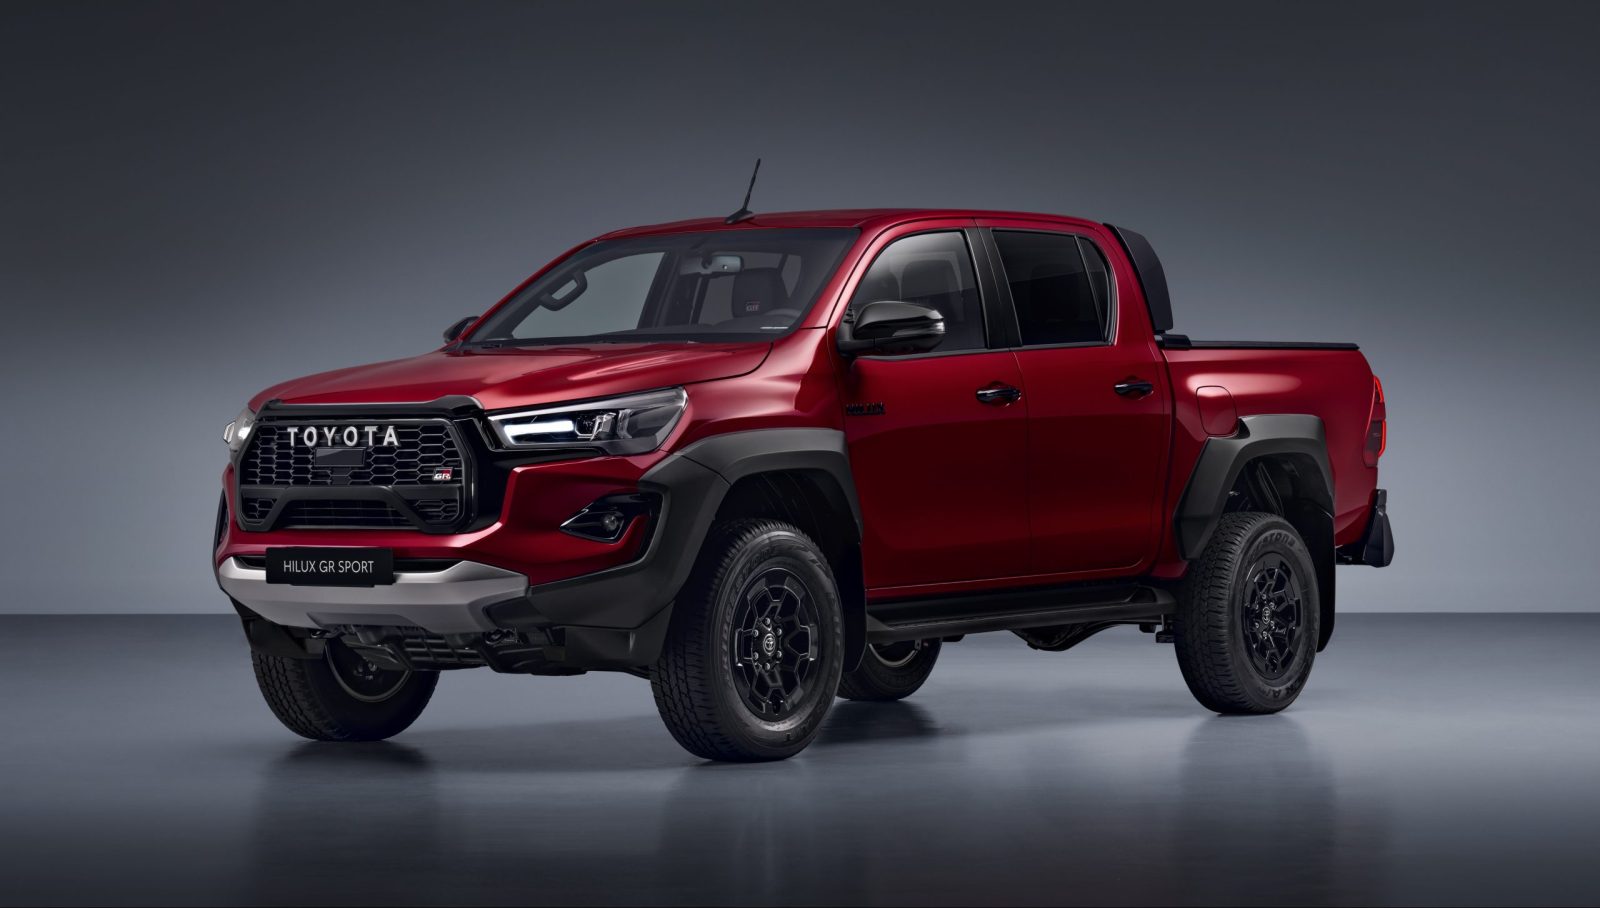 Toyota Hilux GR Sport Is the Coolest Pickup We Can't Have